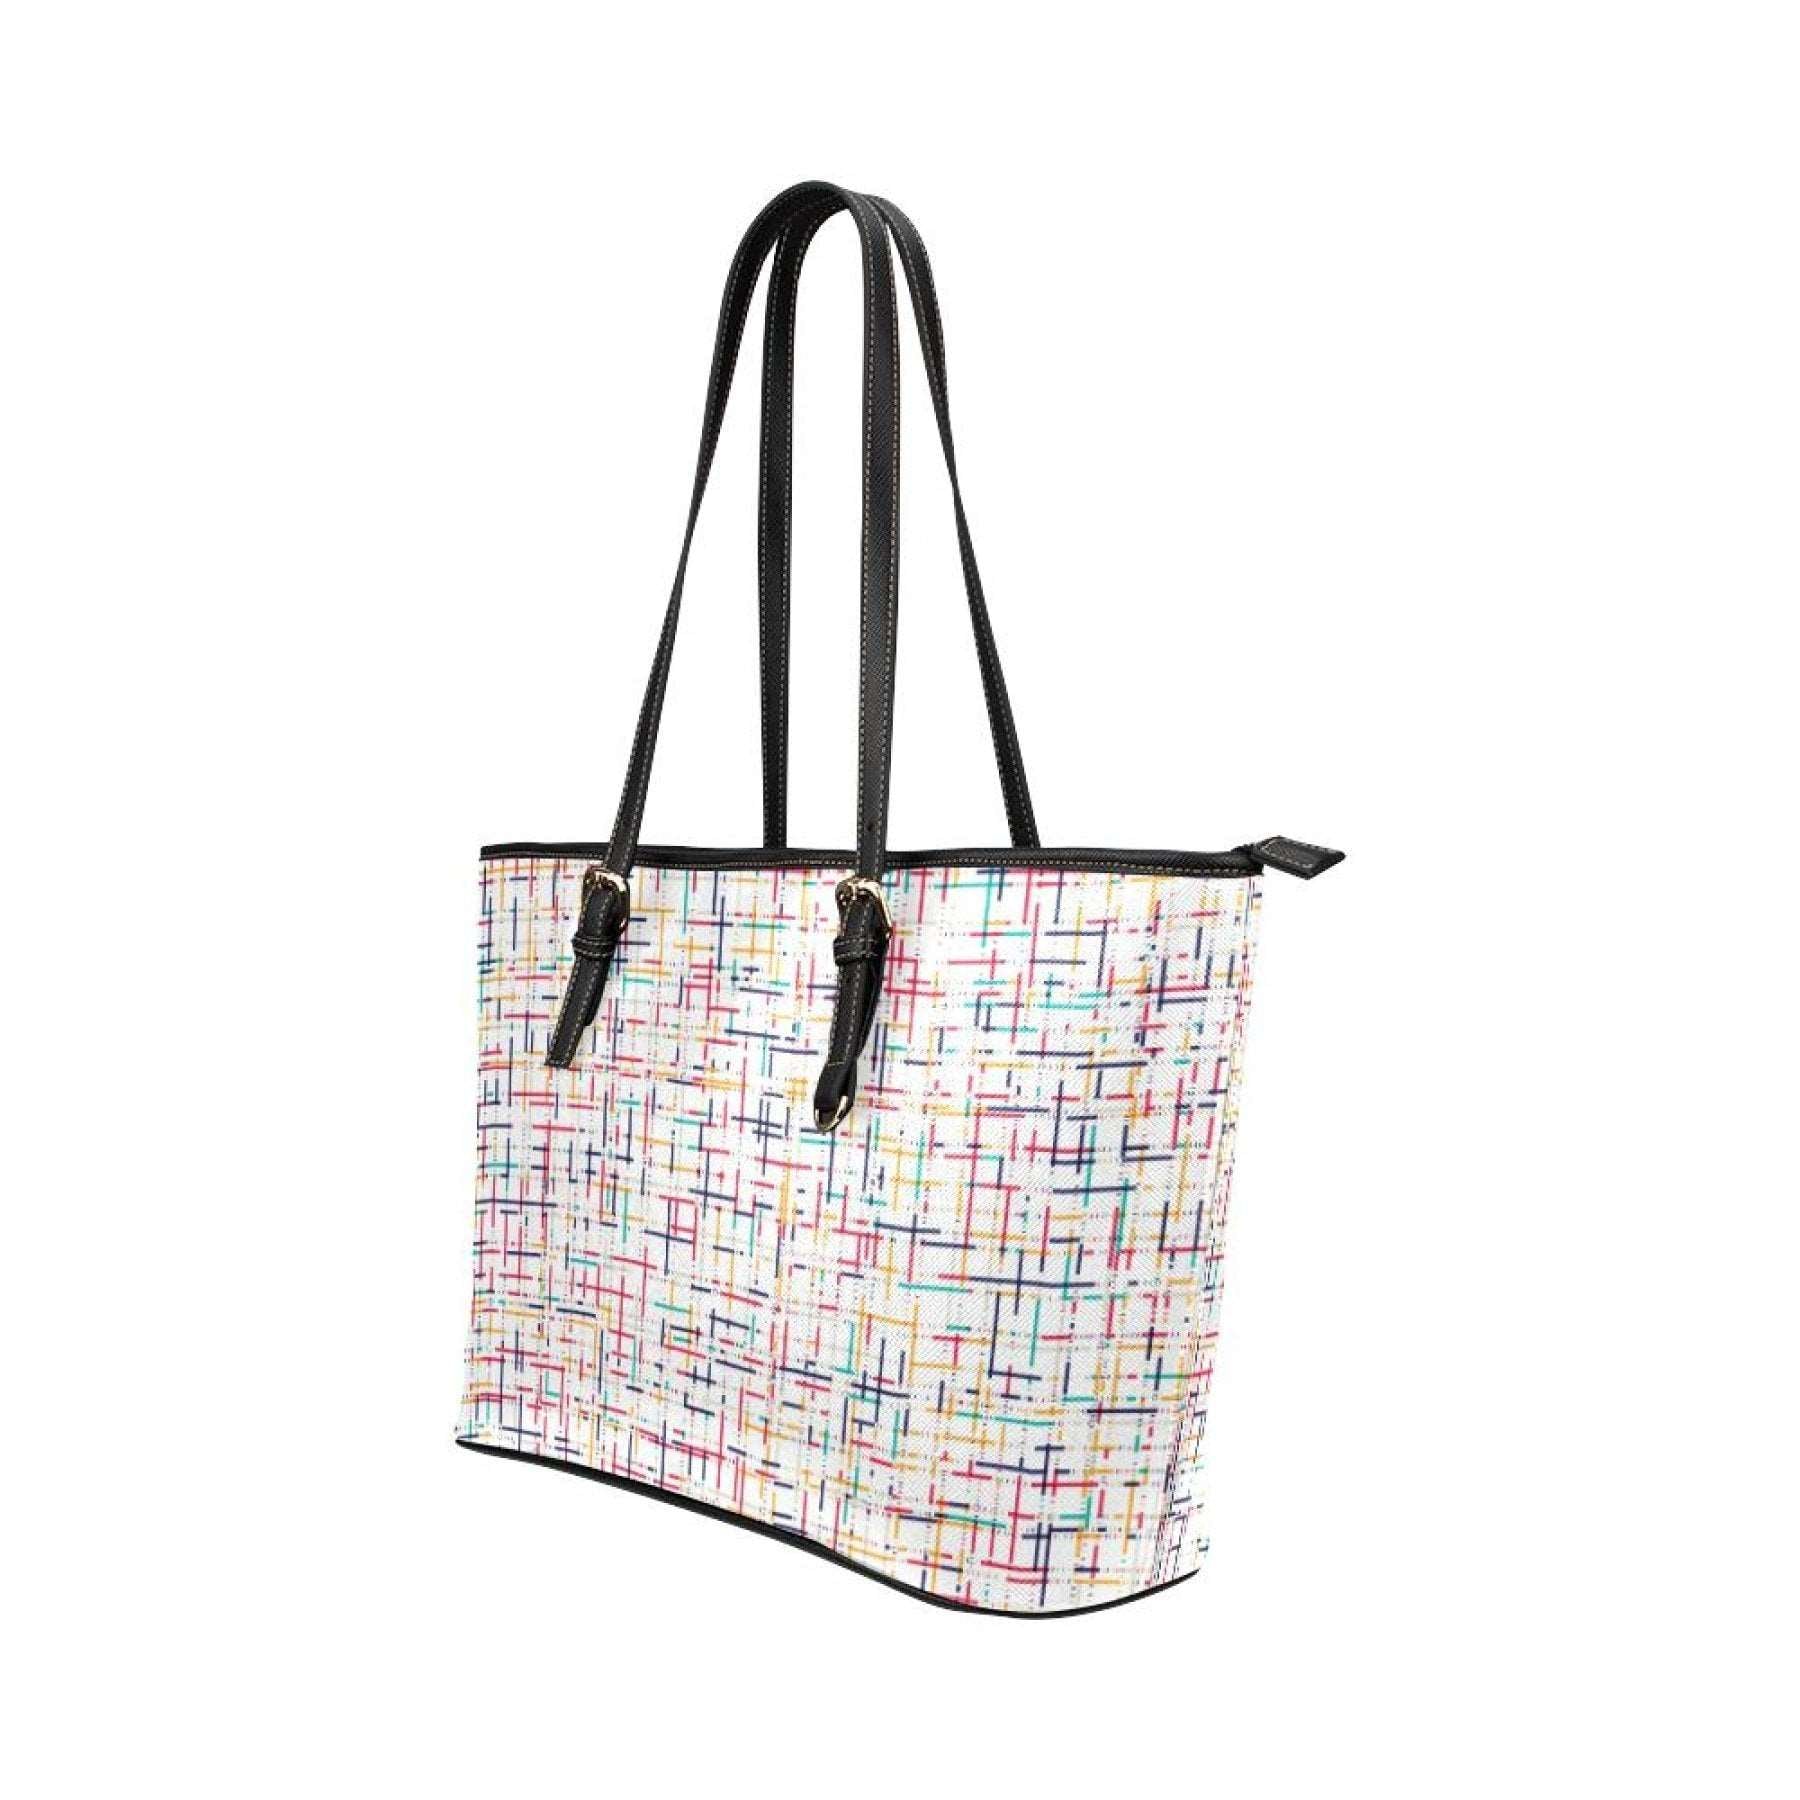 Tote Bags, White Colorful Stripes Style Bag Grey Coco